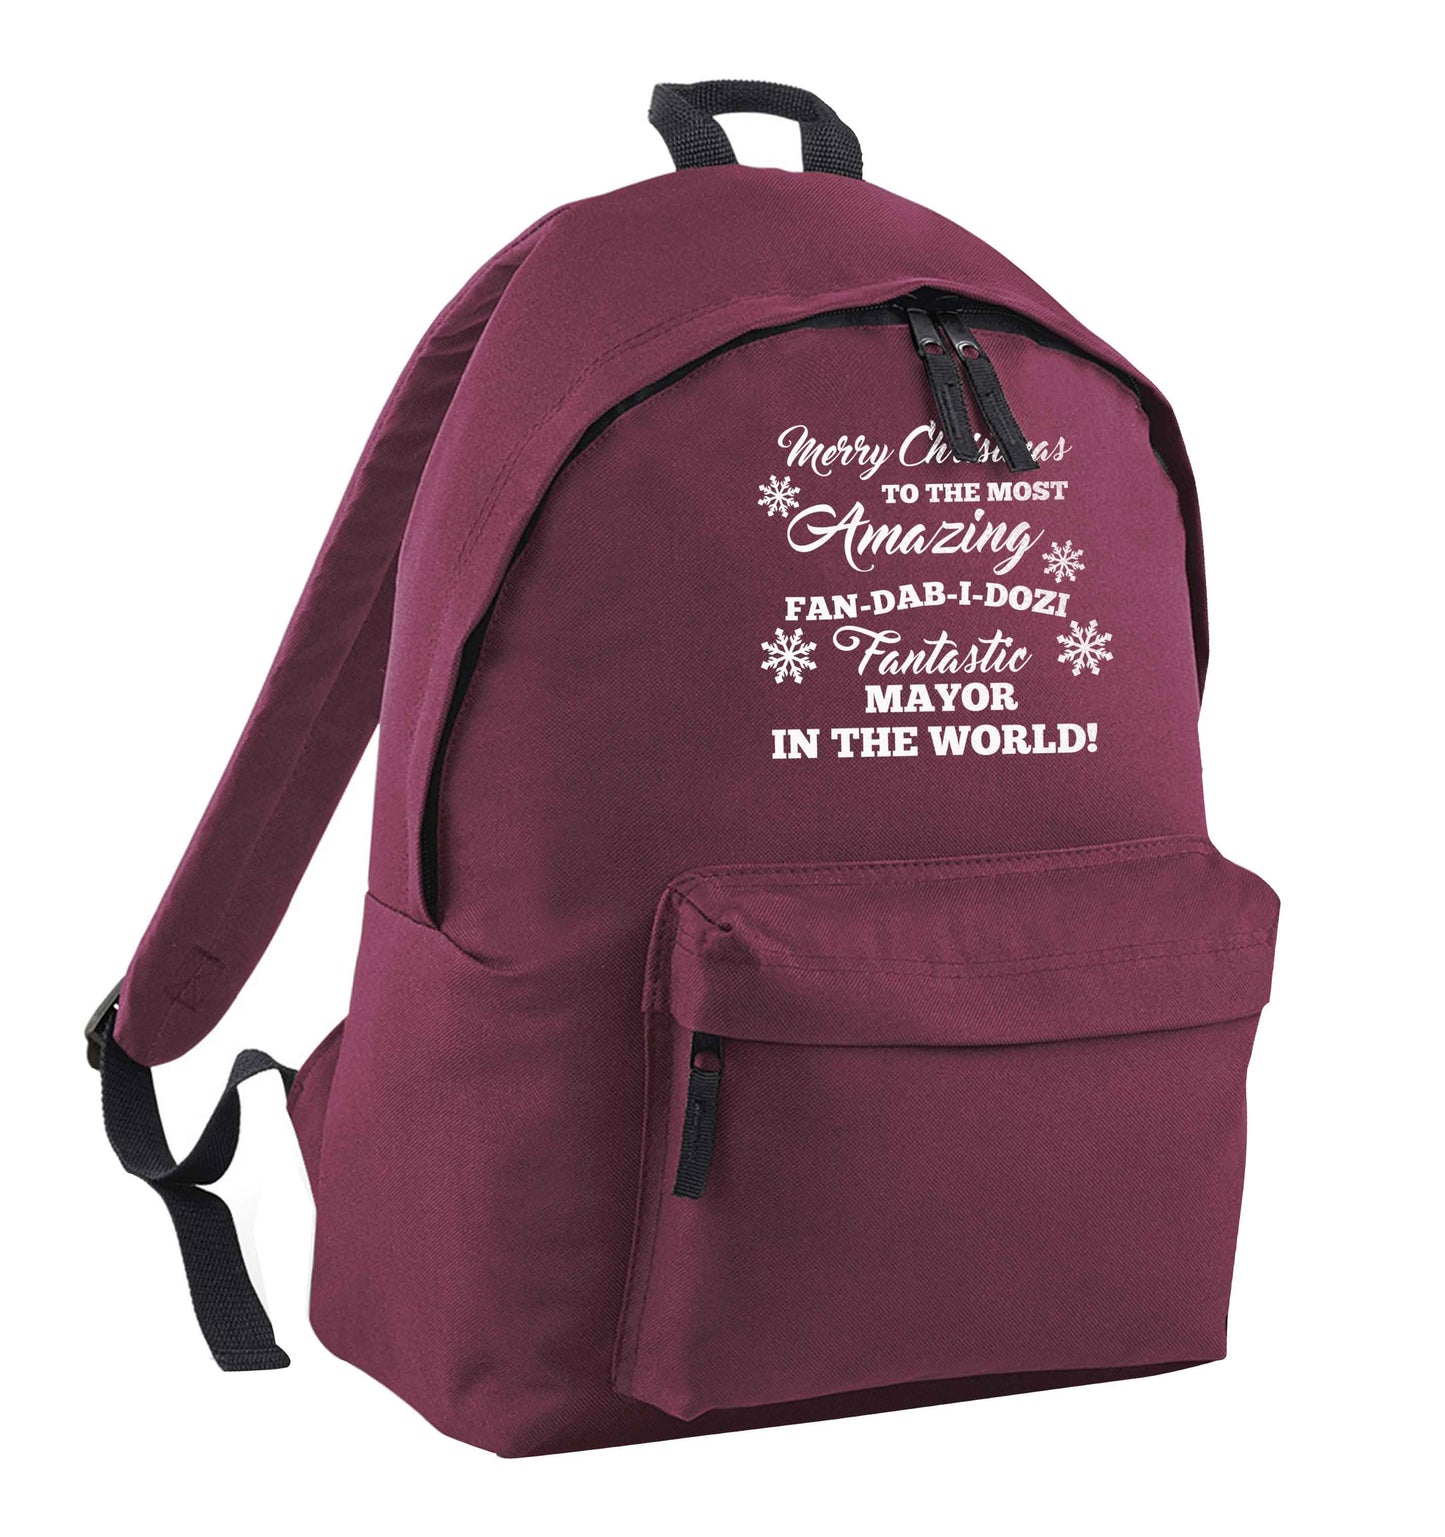 Merry Christmas to the most amazing fireman in the world! maroon adults backpack